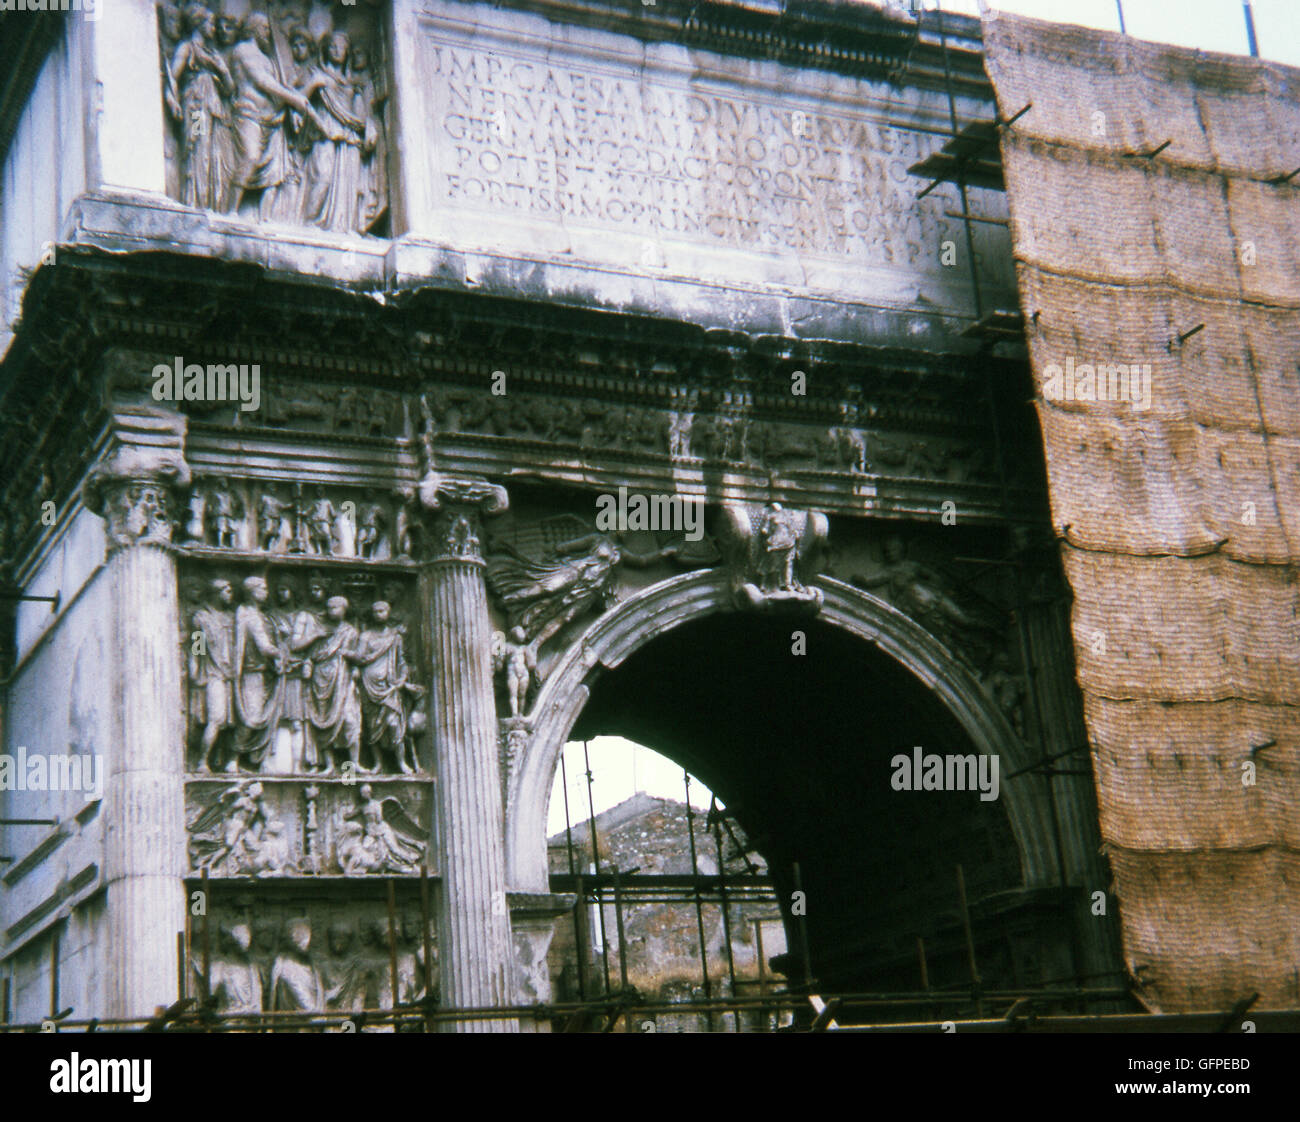 This photo, taken in 1970, shows the Arch of Trajan at Benevento (Beneventum) in southern Italy when it was under construction. The arch straddles the Via Appia (Appian Way) at its entry point to Benevento. The arch was built in A.D. 114. The arch was built to commemorate the completion of the Via Traiana, which offered a faster route to Rome than the Via Appia. The reliefs on the arch glorify Trajan and his accomplishments, especially his conquest of new lands. A key feature of the reliefs is the numerous young people depicted, including young people receiving the alimenta, the public welfare Stock Photo